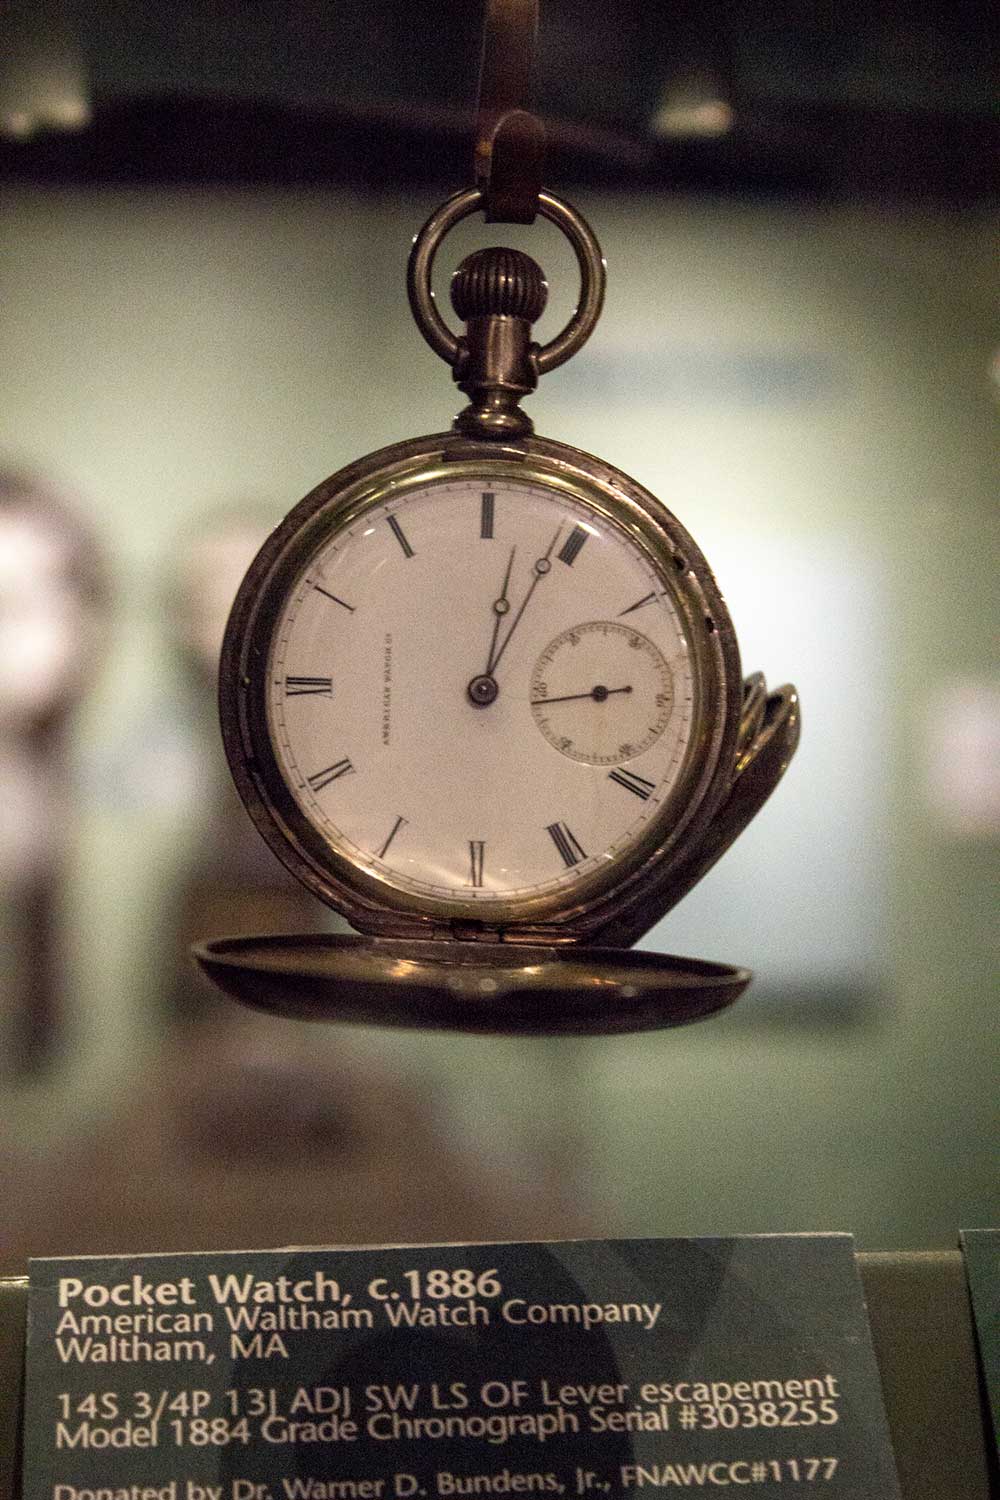 A pocket watch, ca. 1886, from the American Waltham Watch Company at the National Watch & Clock Museum